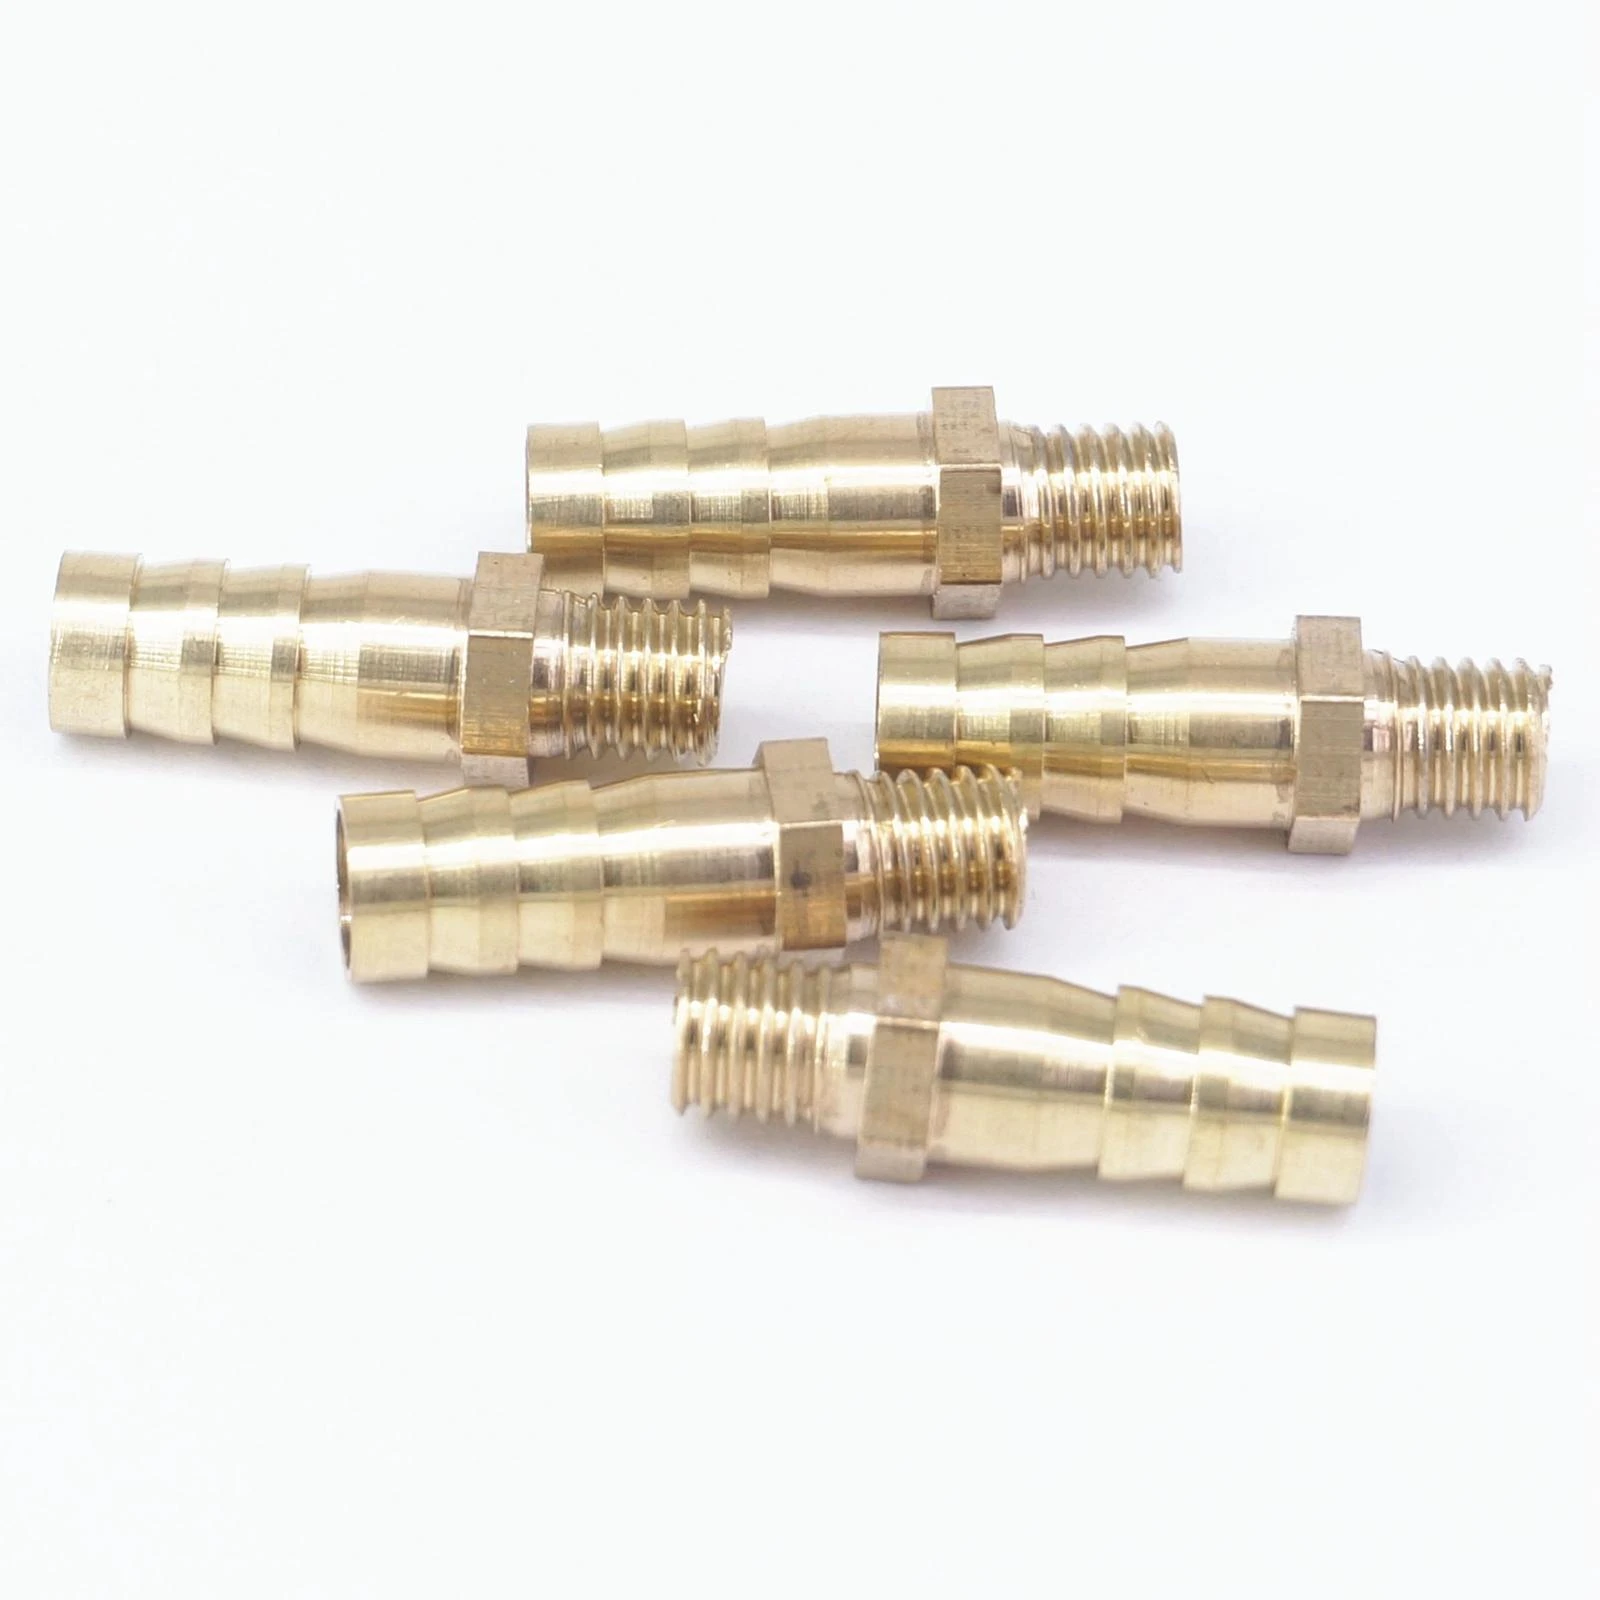 LOT 5 Hose Barb I/D 19mm x 1/2 BSP Male Thread Brass Coupler Splicer Connector Fitting for Fuel Gas Water 